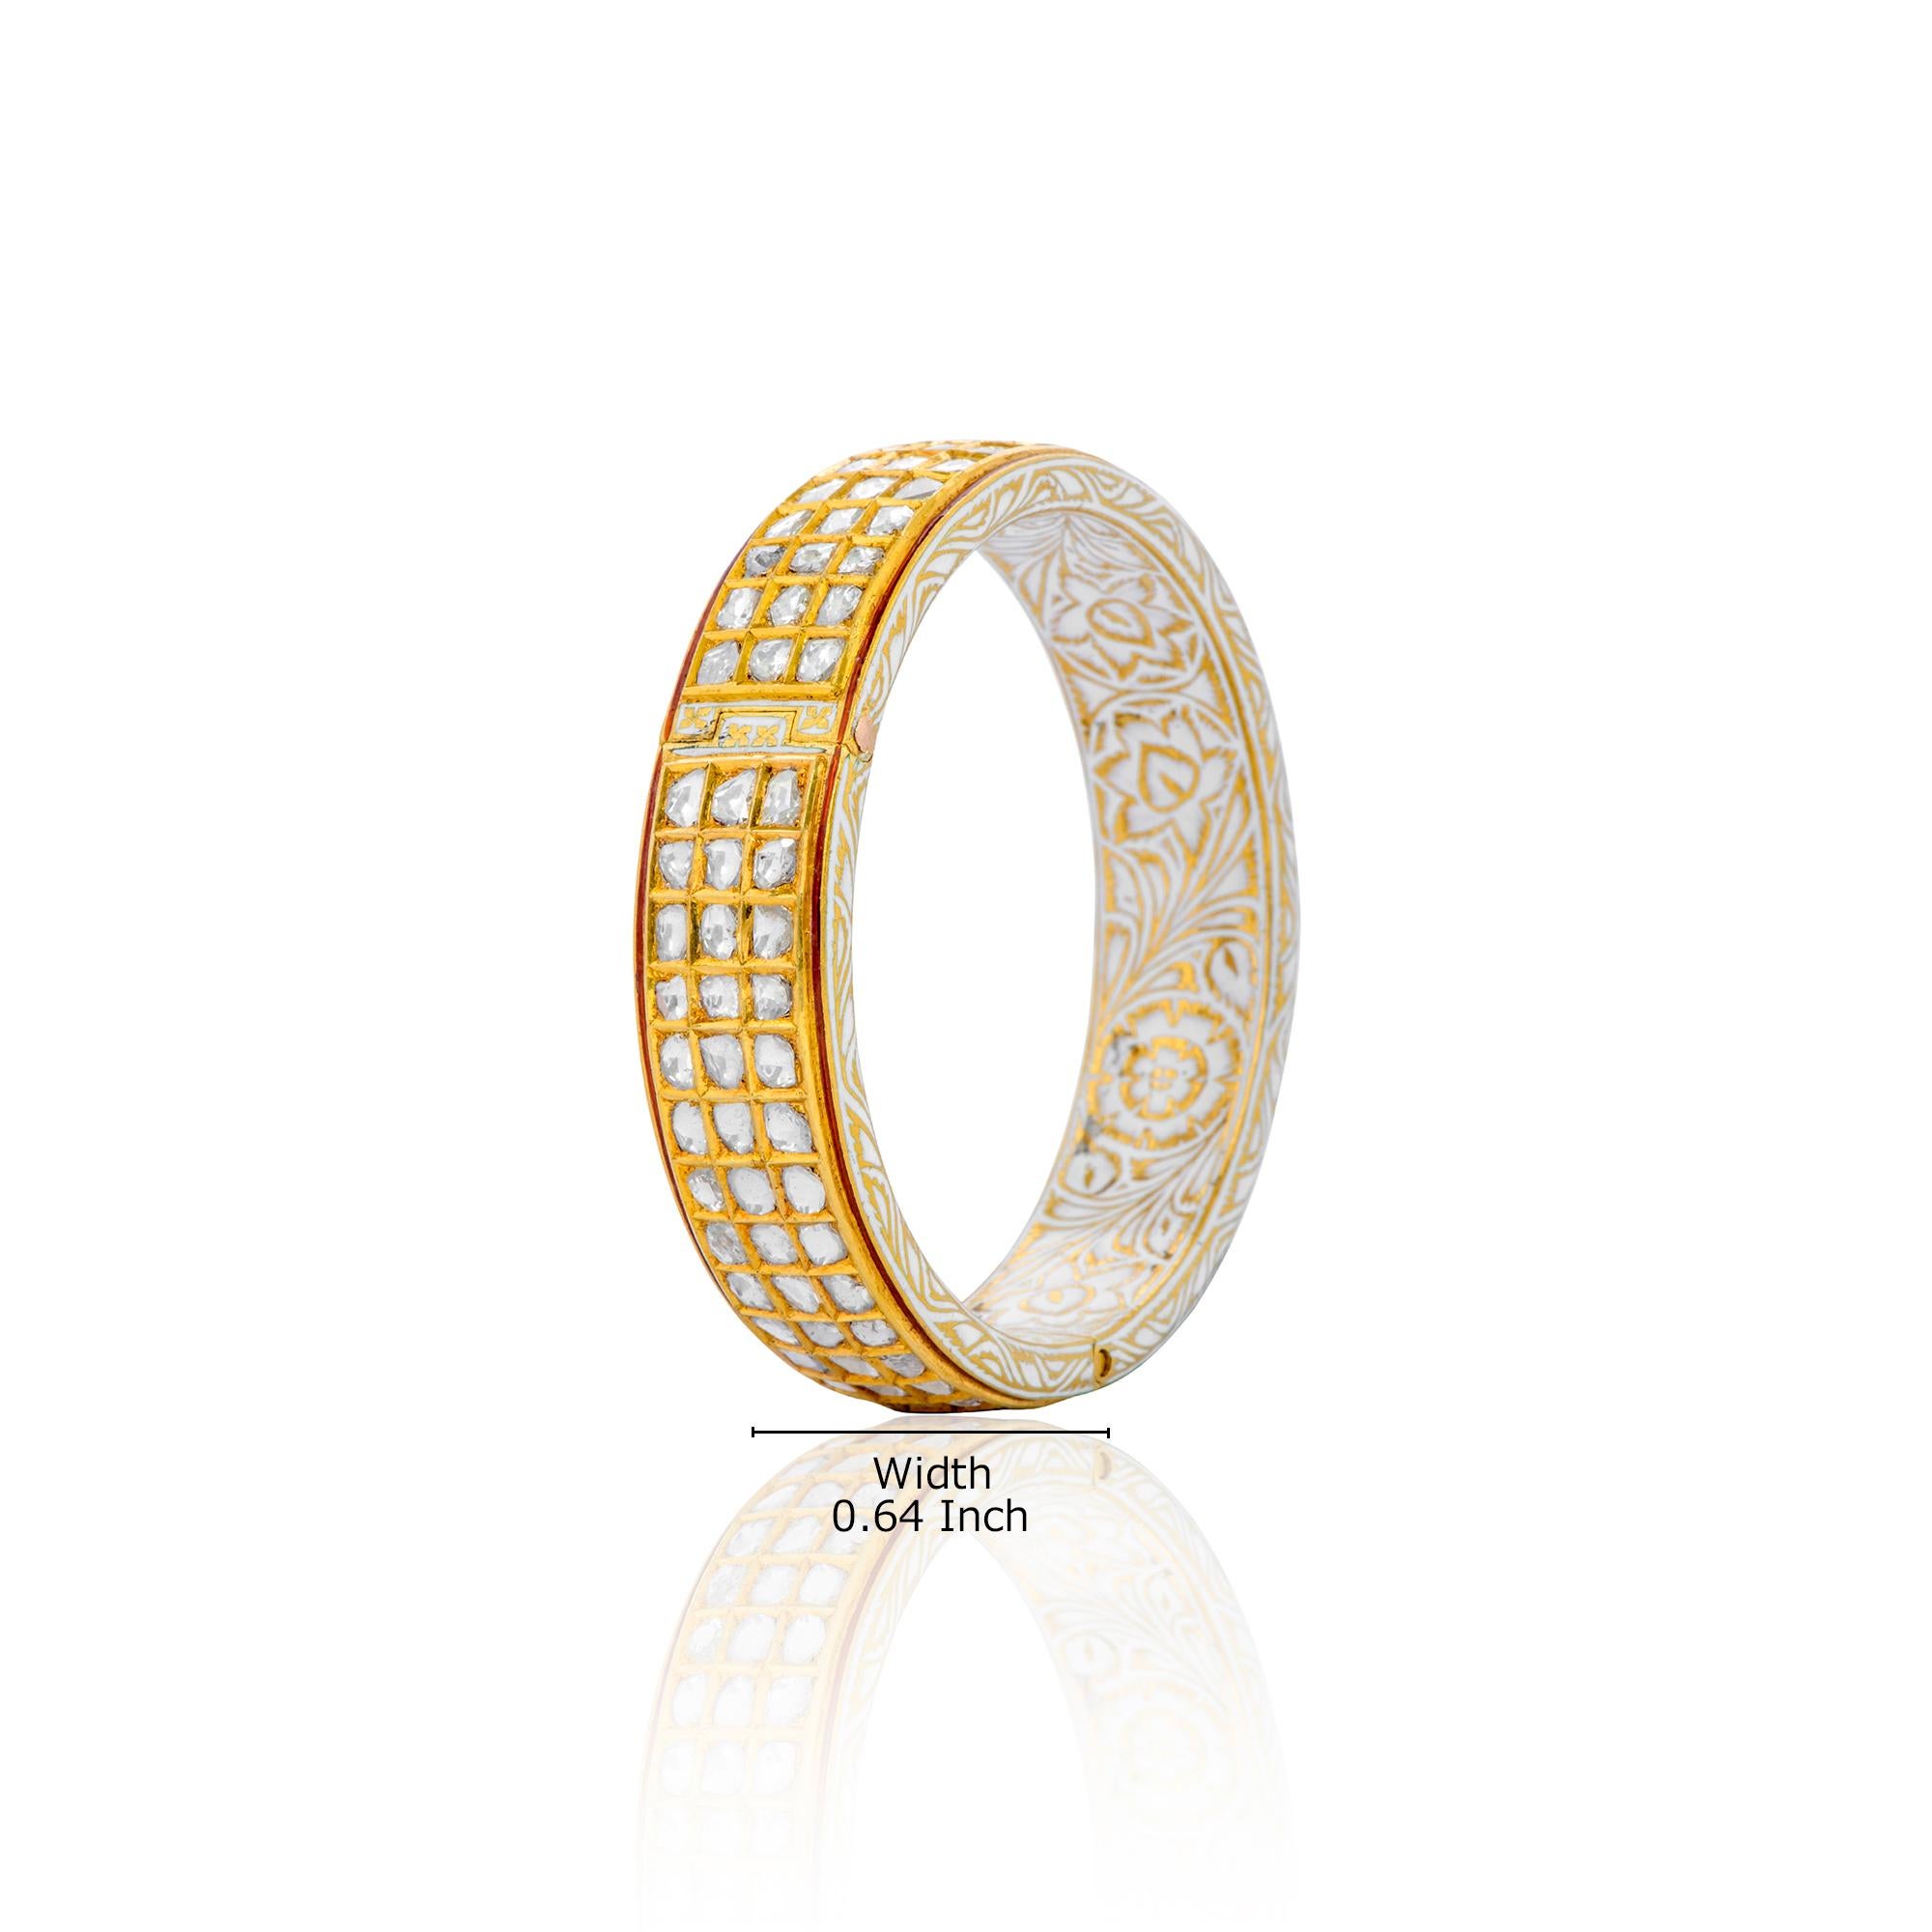 Uncut 22 Karat Yellow Gold Three Line Diamond and White Enamel Bangle Handcrafted For Sale